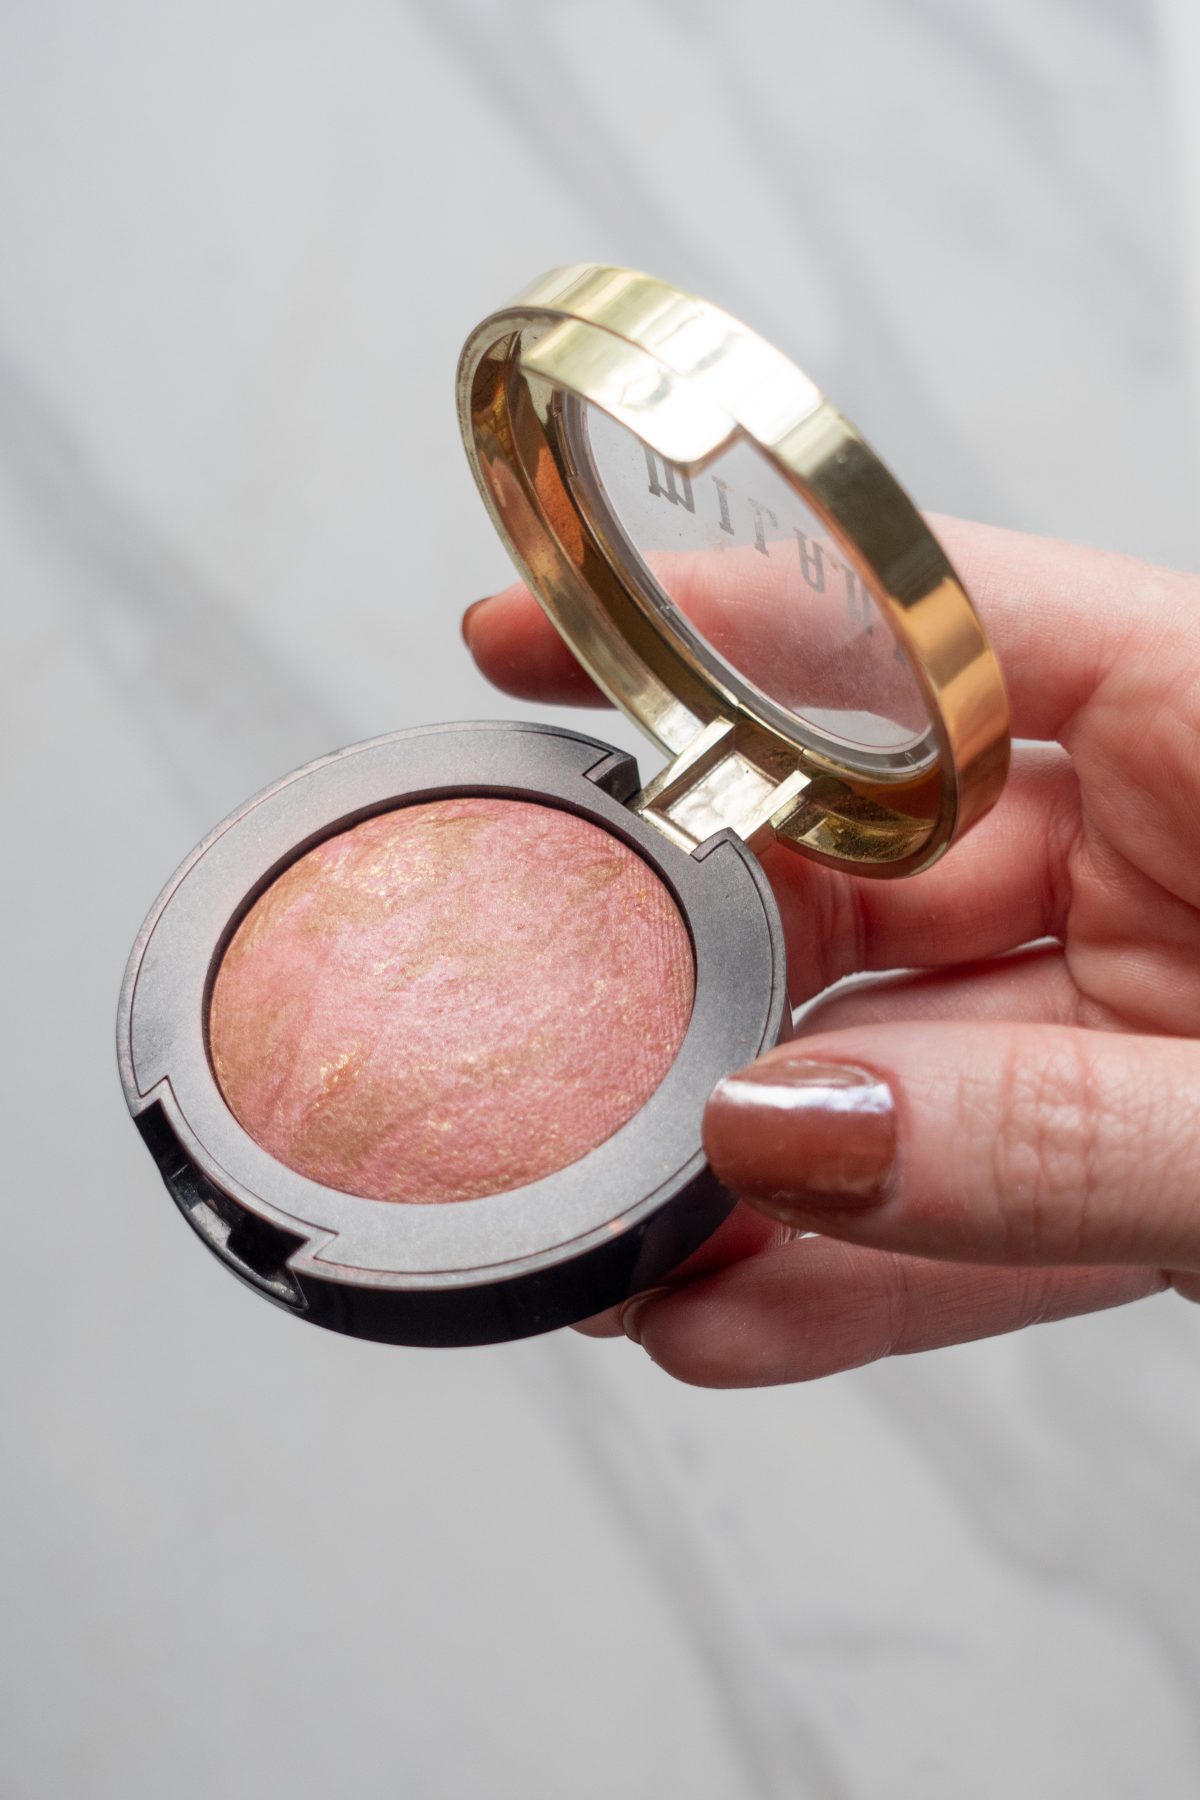 Milani Baked Blush Review and Swatches - Berry Amore